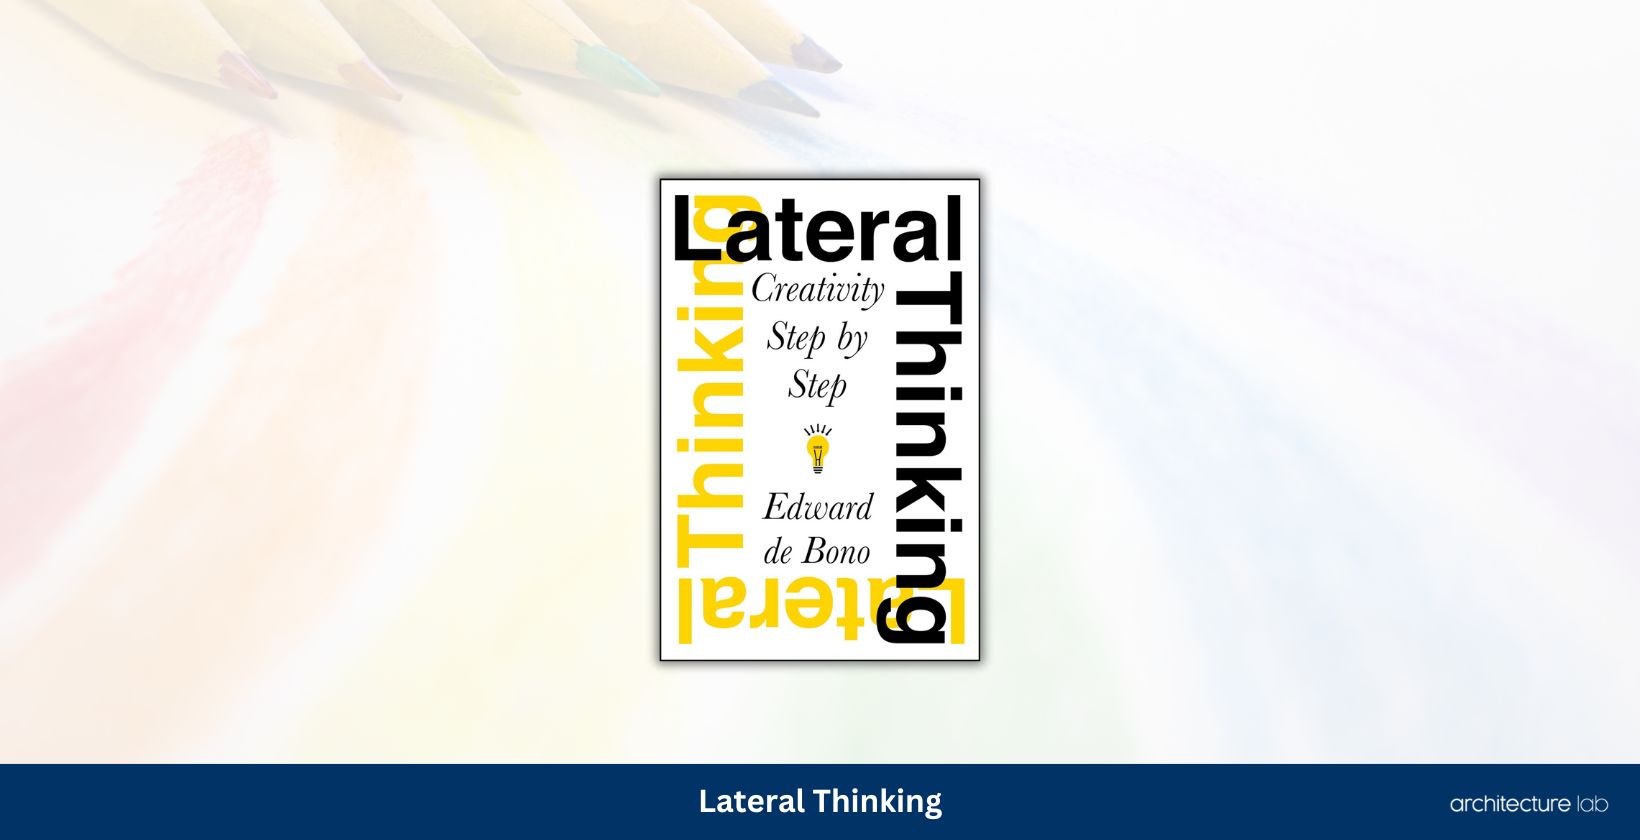 Lateral thinking